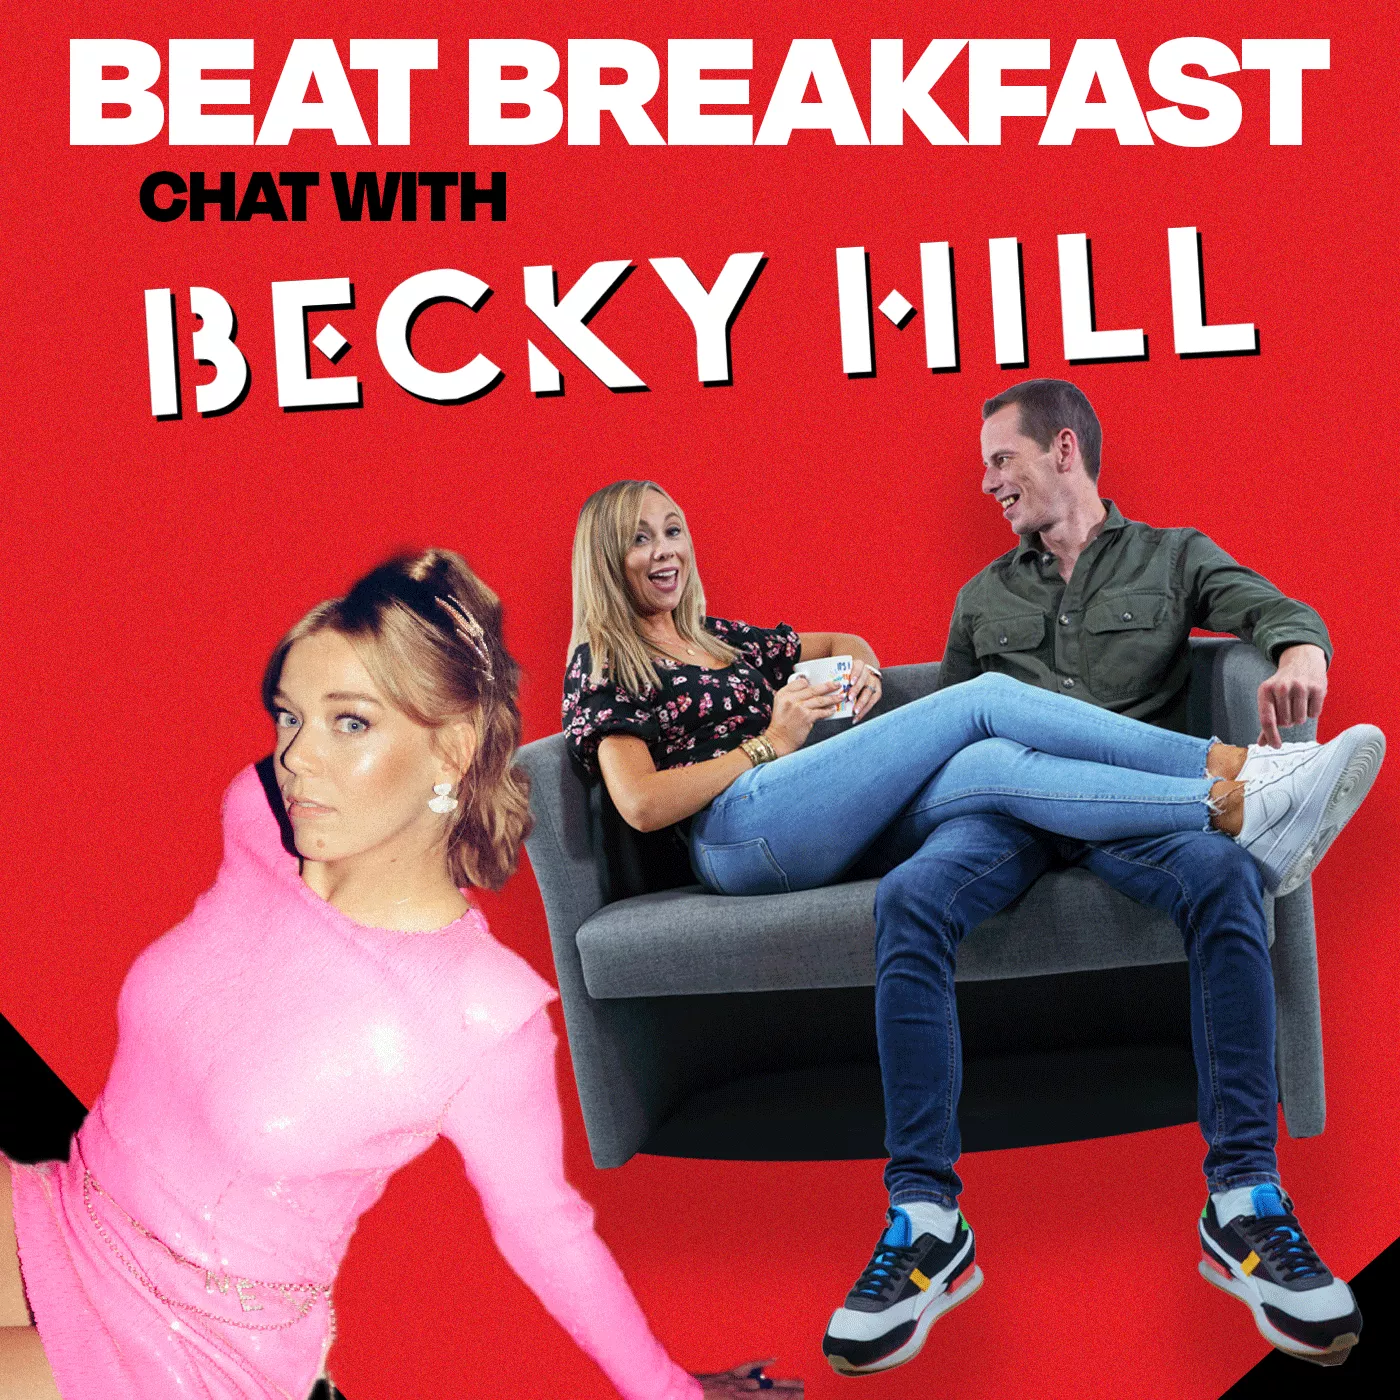 Becky Hill chats with Beat Breakfast on Friday June 9th 2023